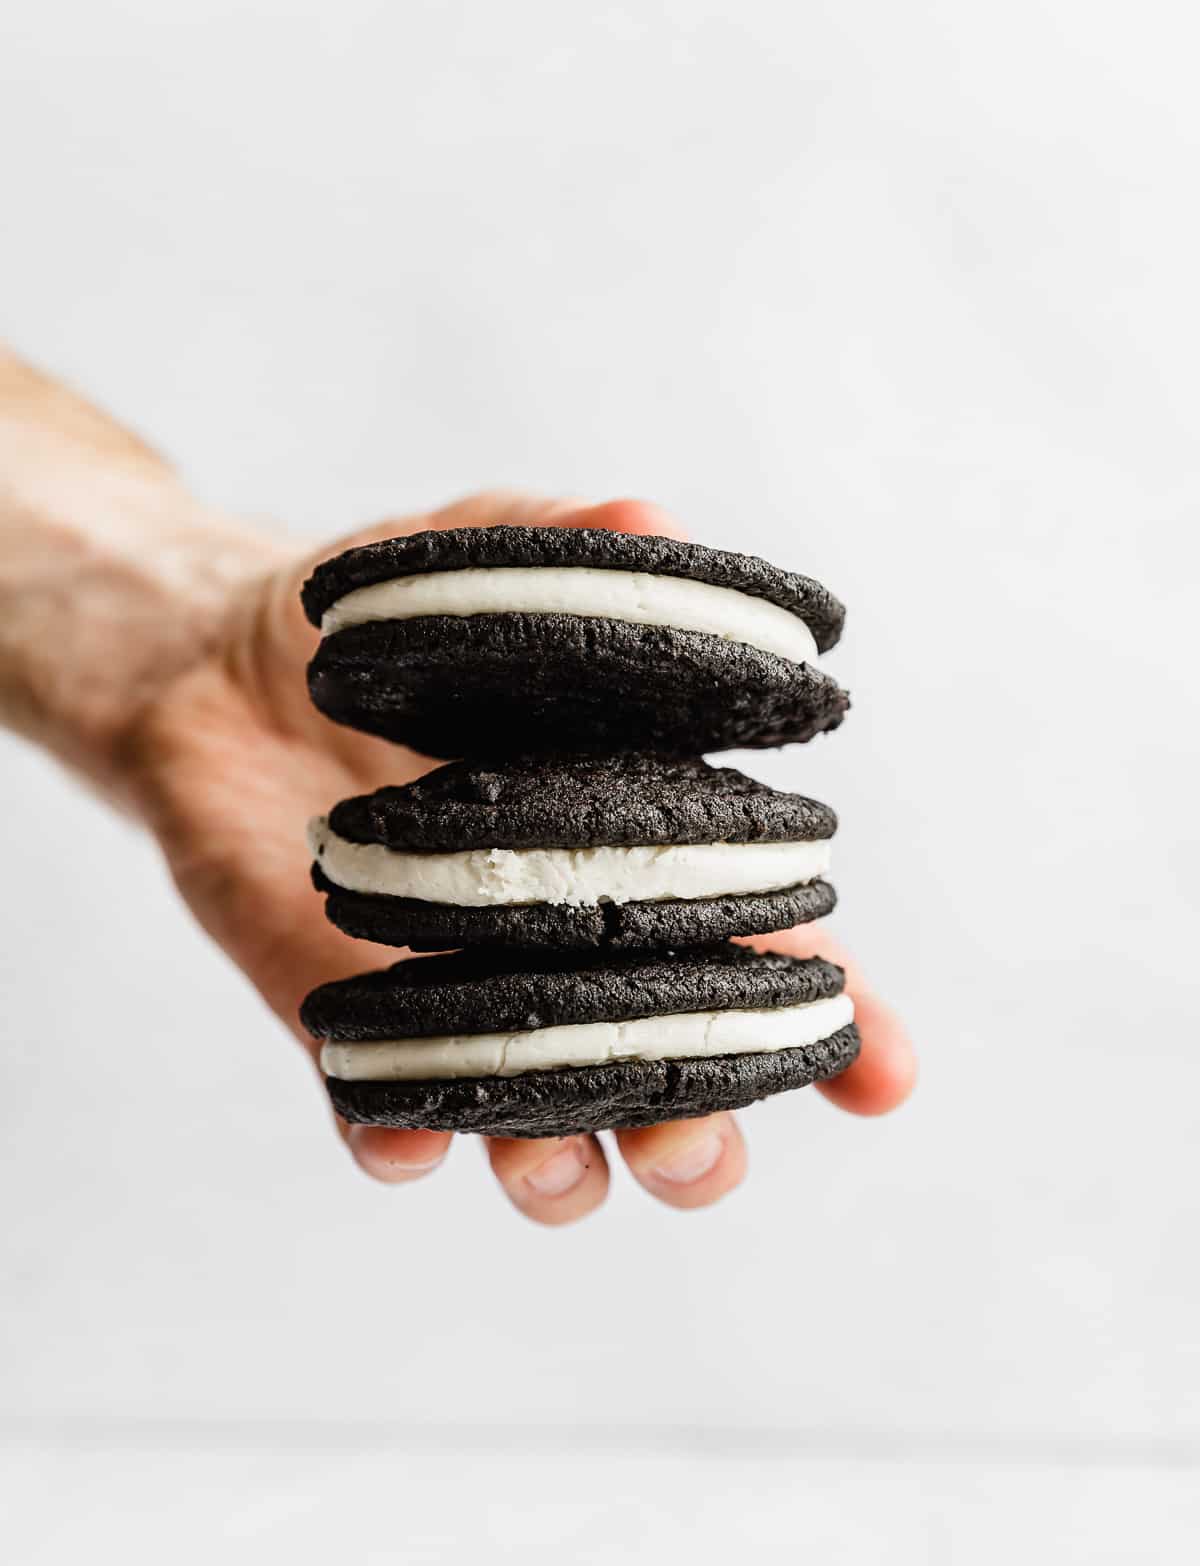 A single hand holding a stack of three Homemade Oreo Cookies sandwiched with a white vanilla frosting.